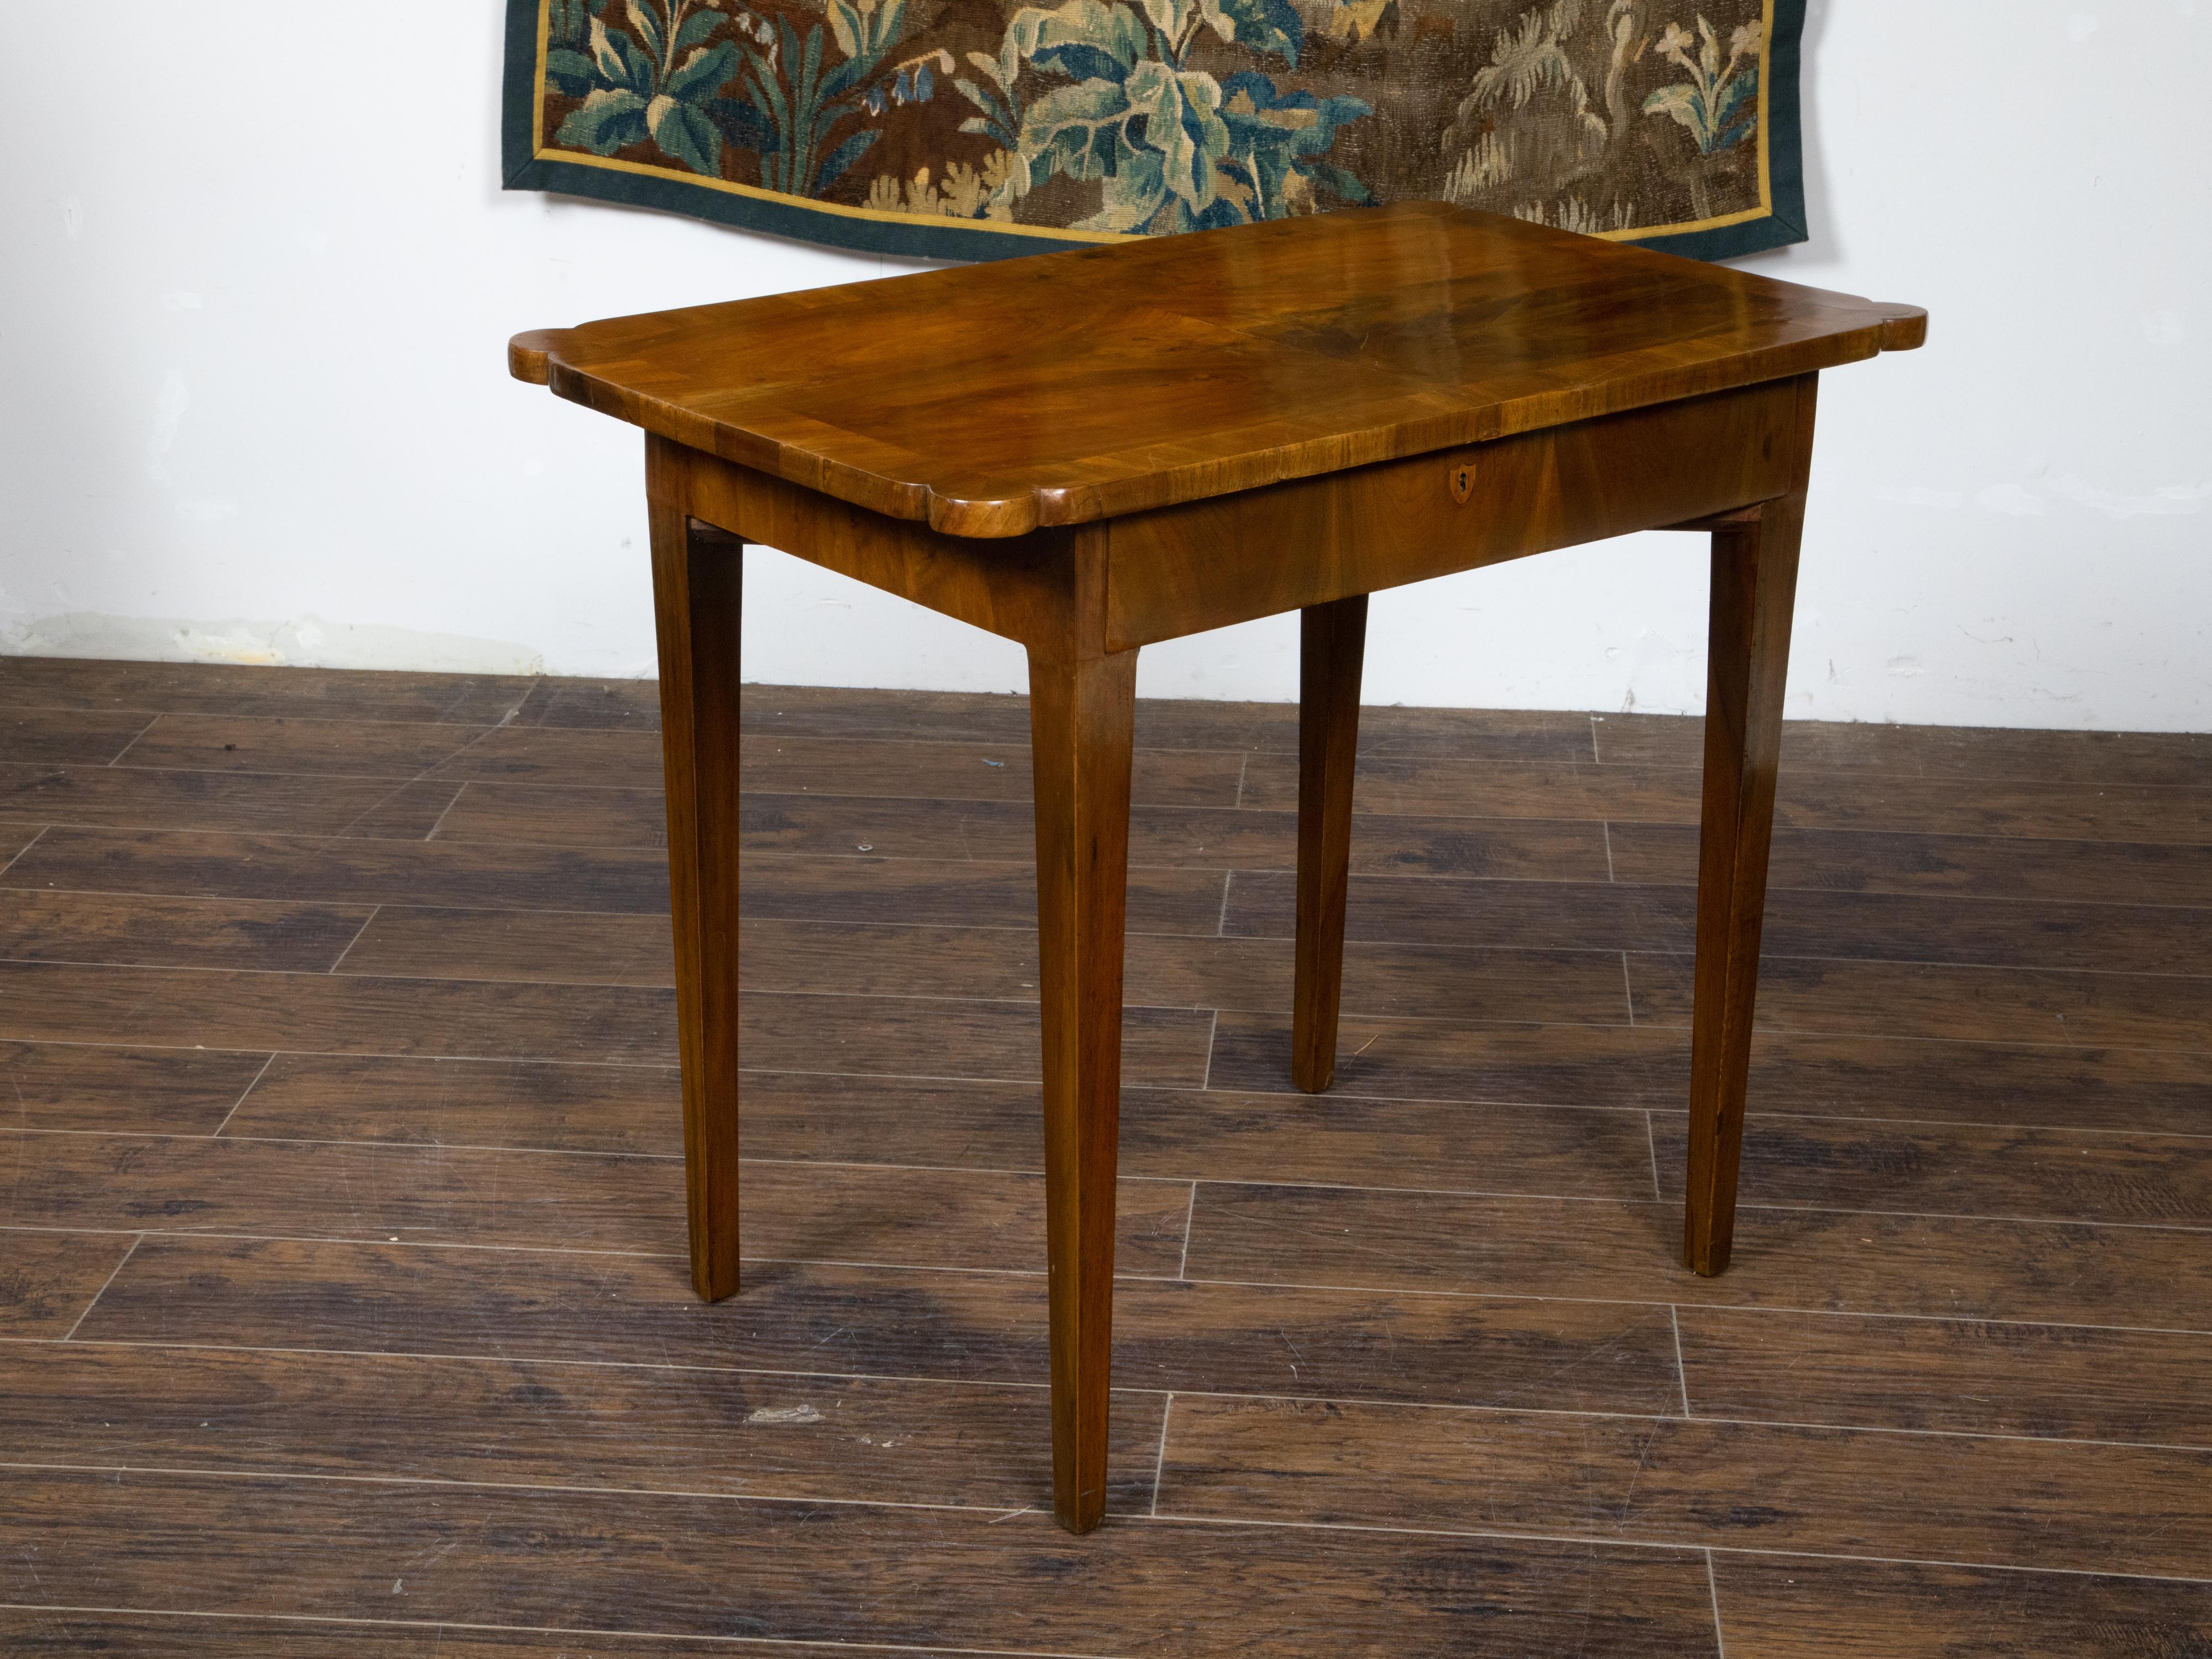 19th Century French Walnut Side Table with Quarter Veneer, Single Drawer and Tapered Legs